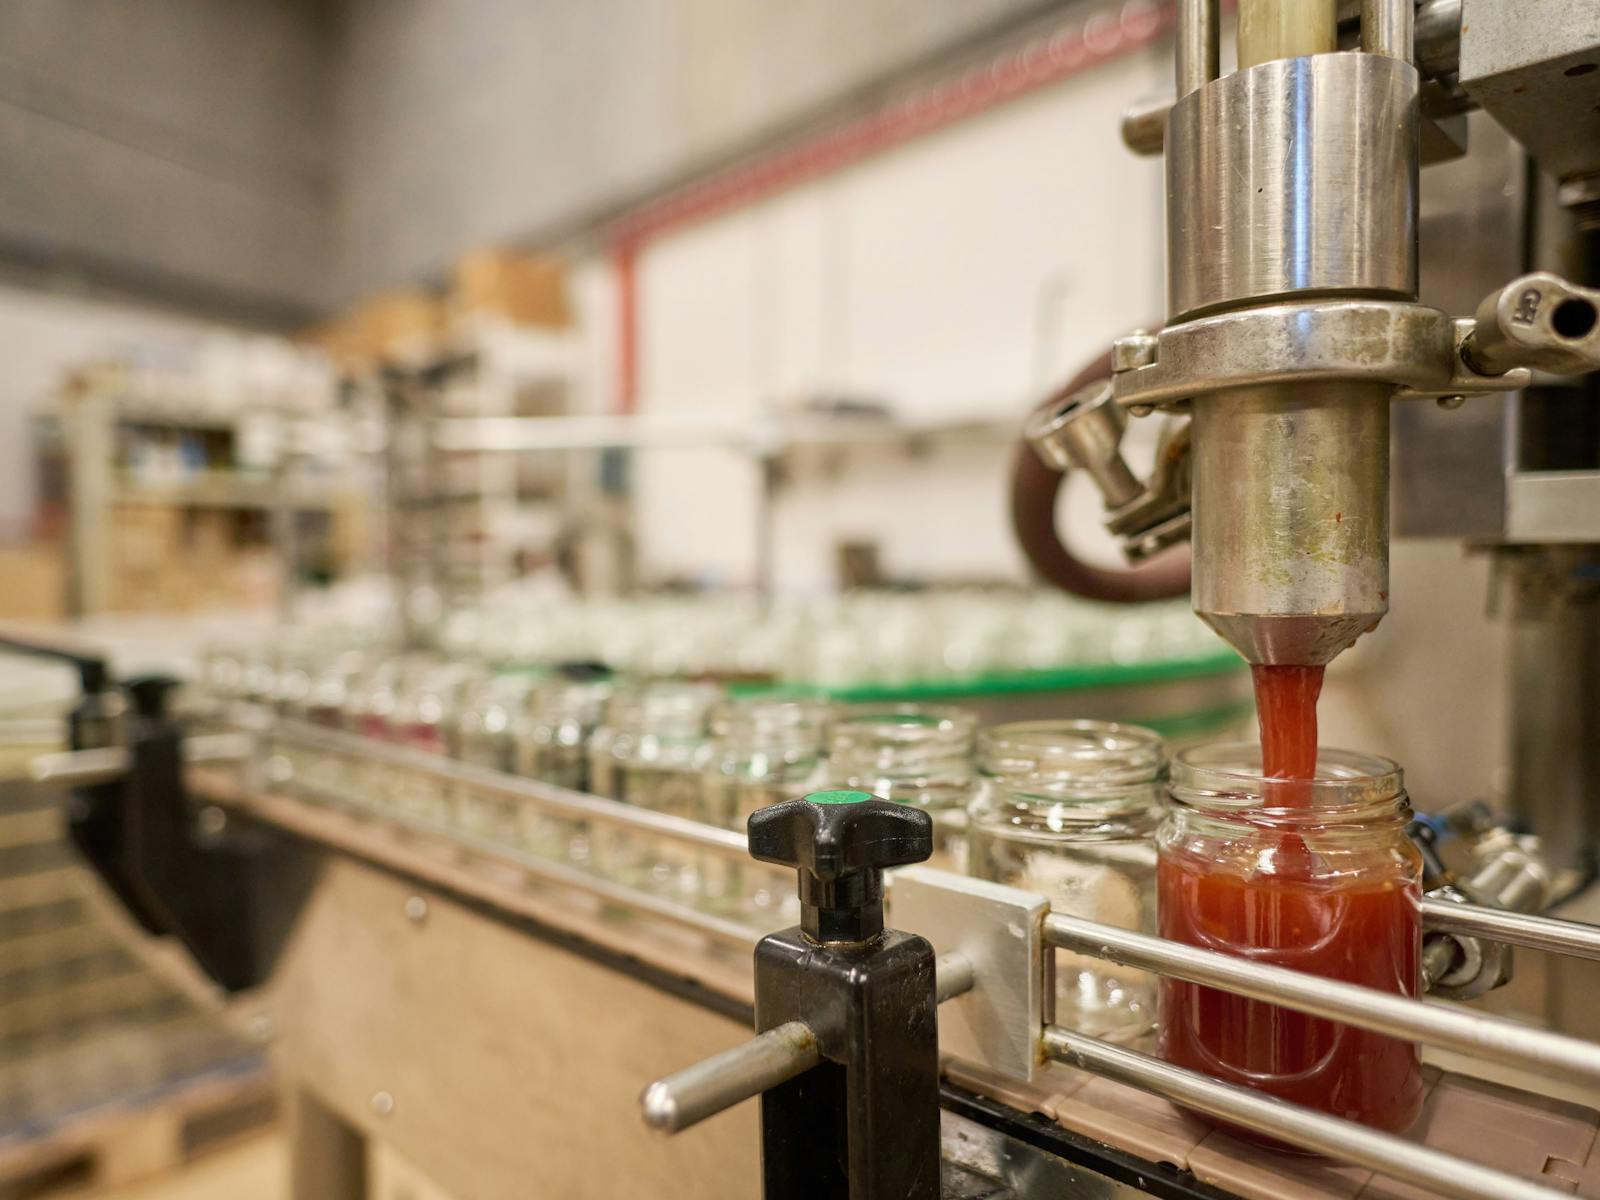 The Treat Factory produces hundred of condiments, relishes, and sauces.